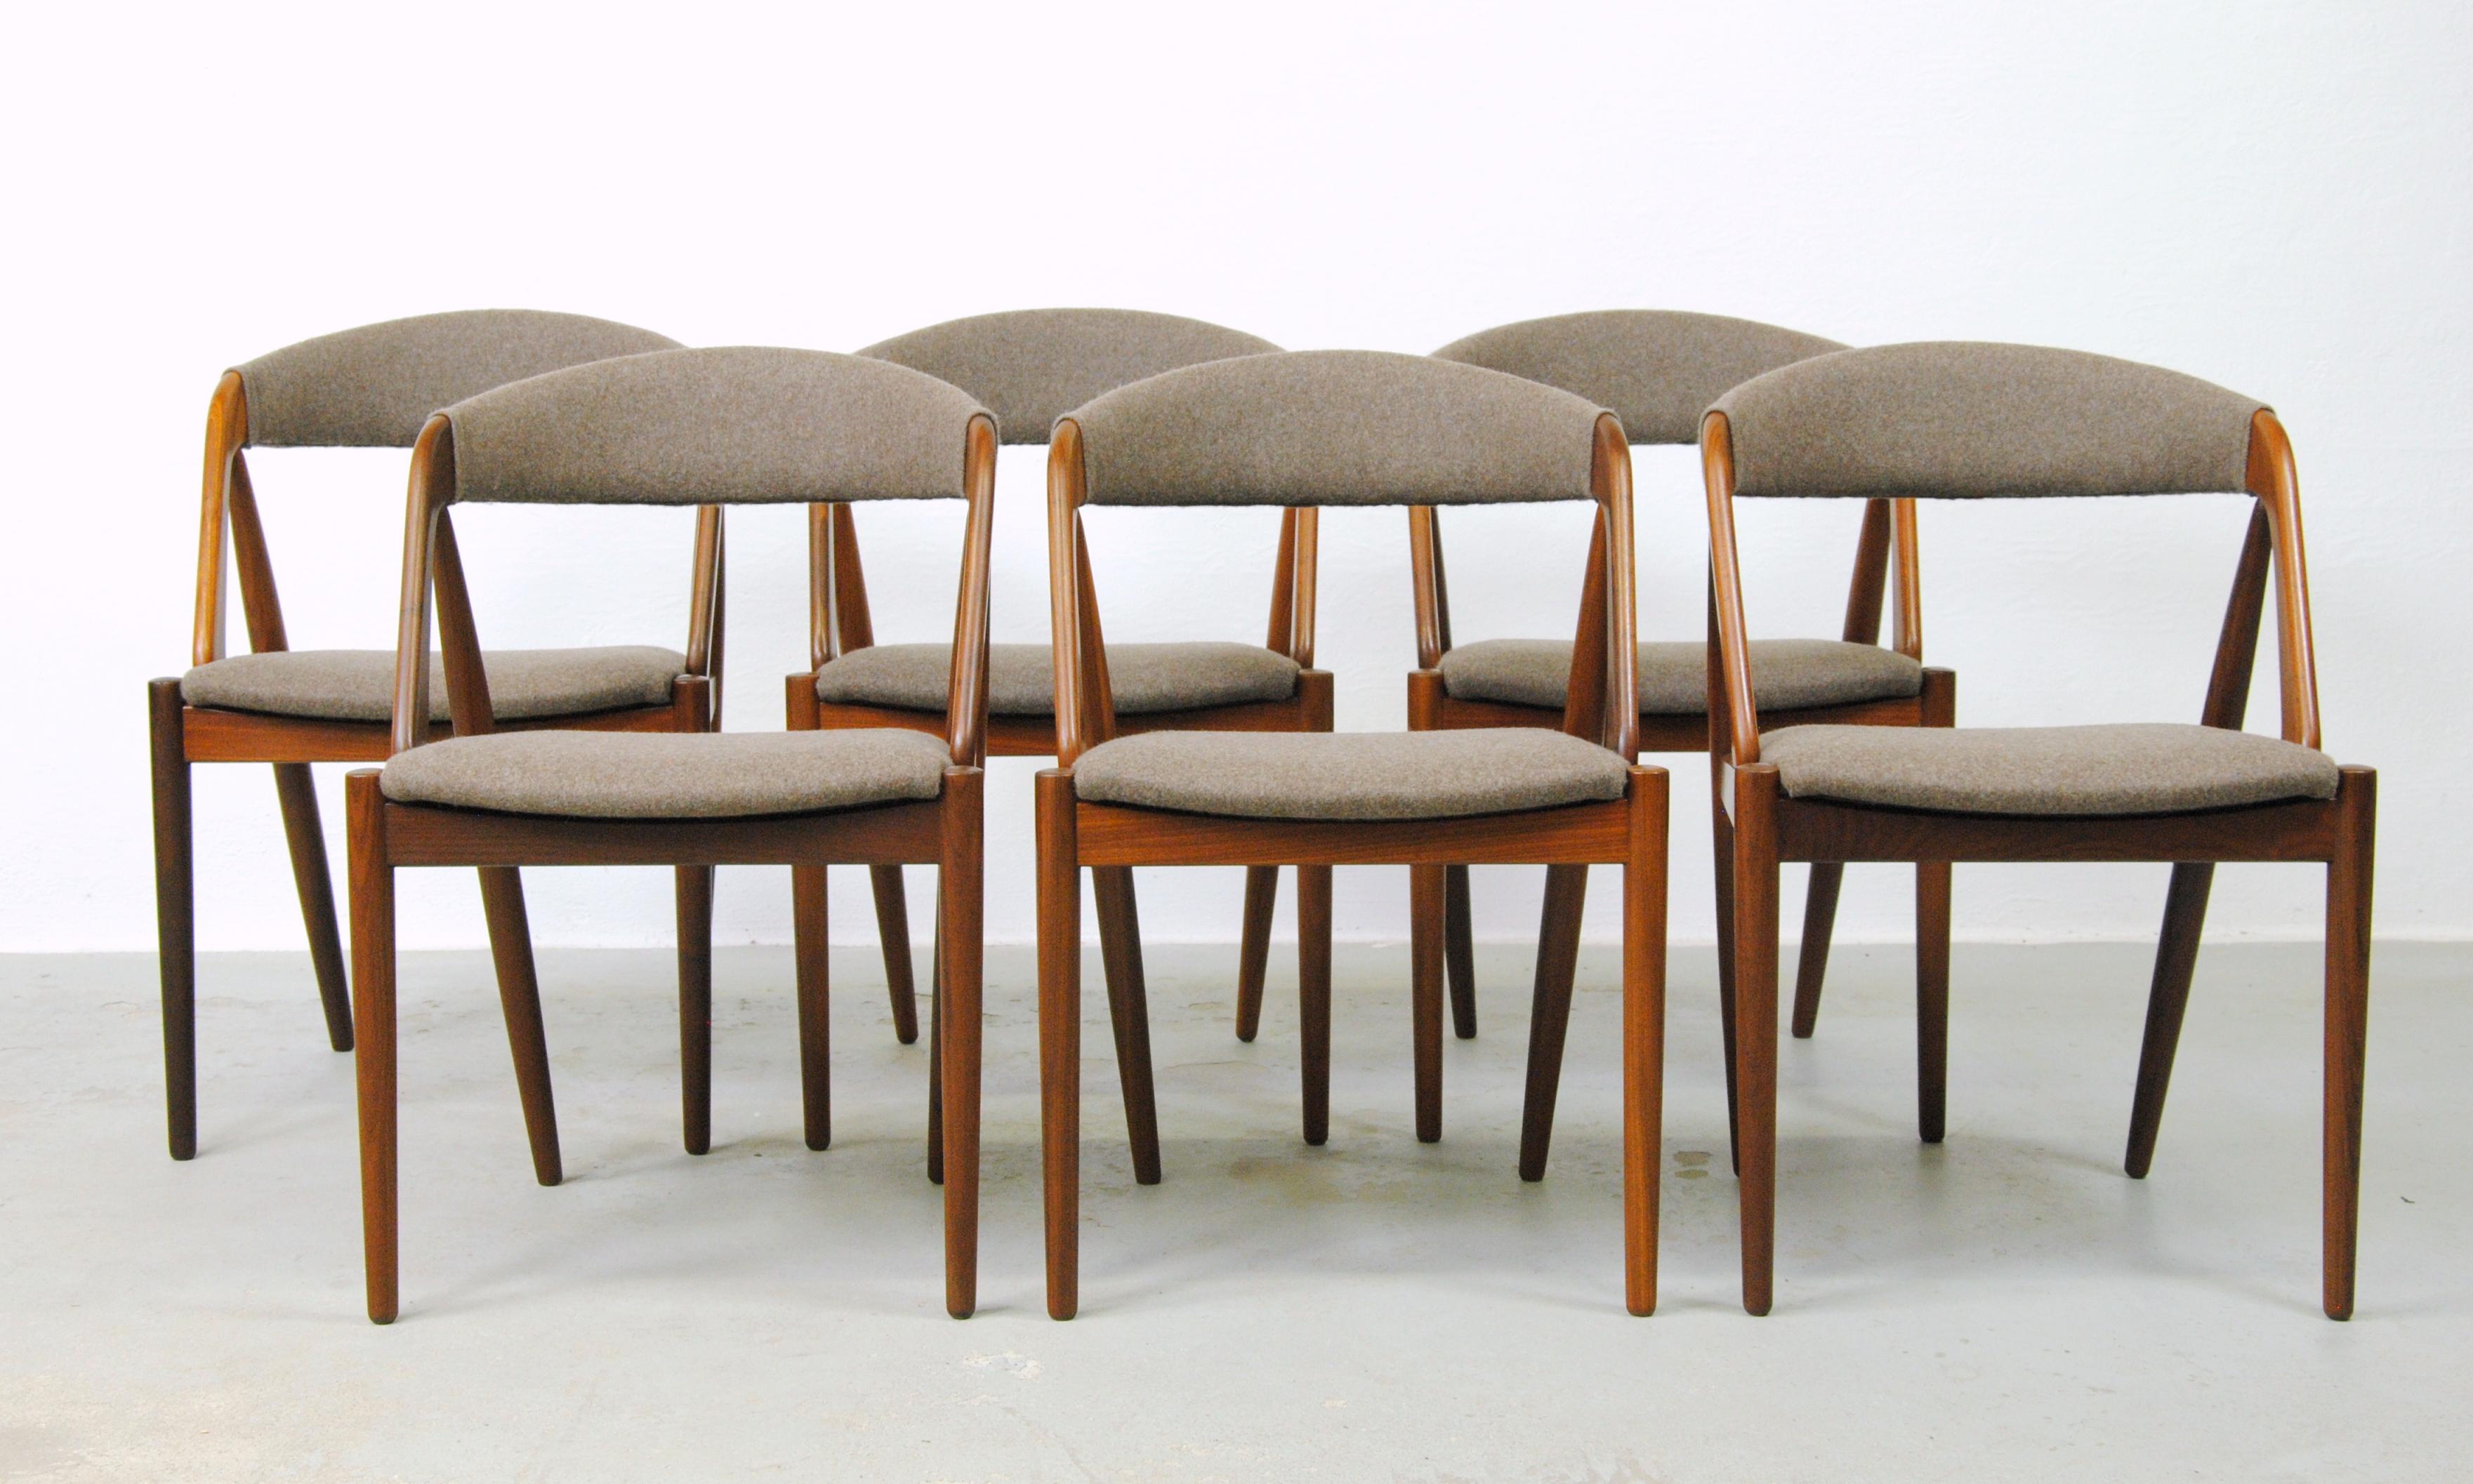 Kai Kristiansen set of six fully restored teak dining chairs by Schou Andersens Møbel Fabrik including custom upholstery.

The A-frame model 31 dining chairs were designed by Kai Kristiansen in 1956 for Schou-Andersens Møbelfabrik and the A-frame